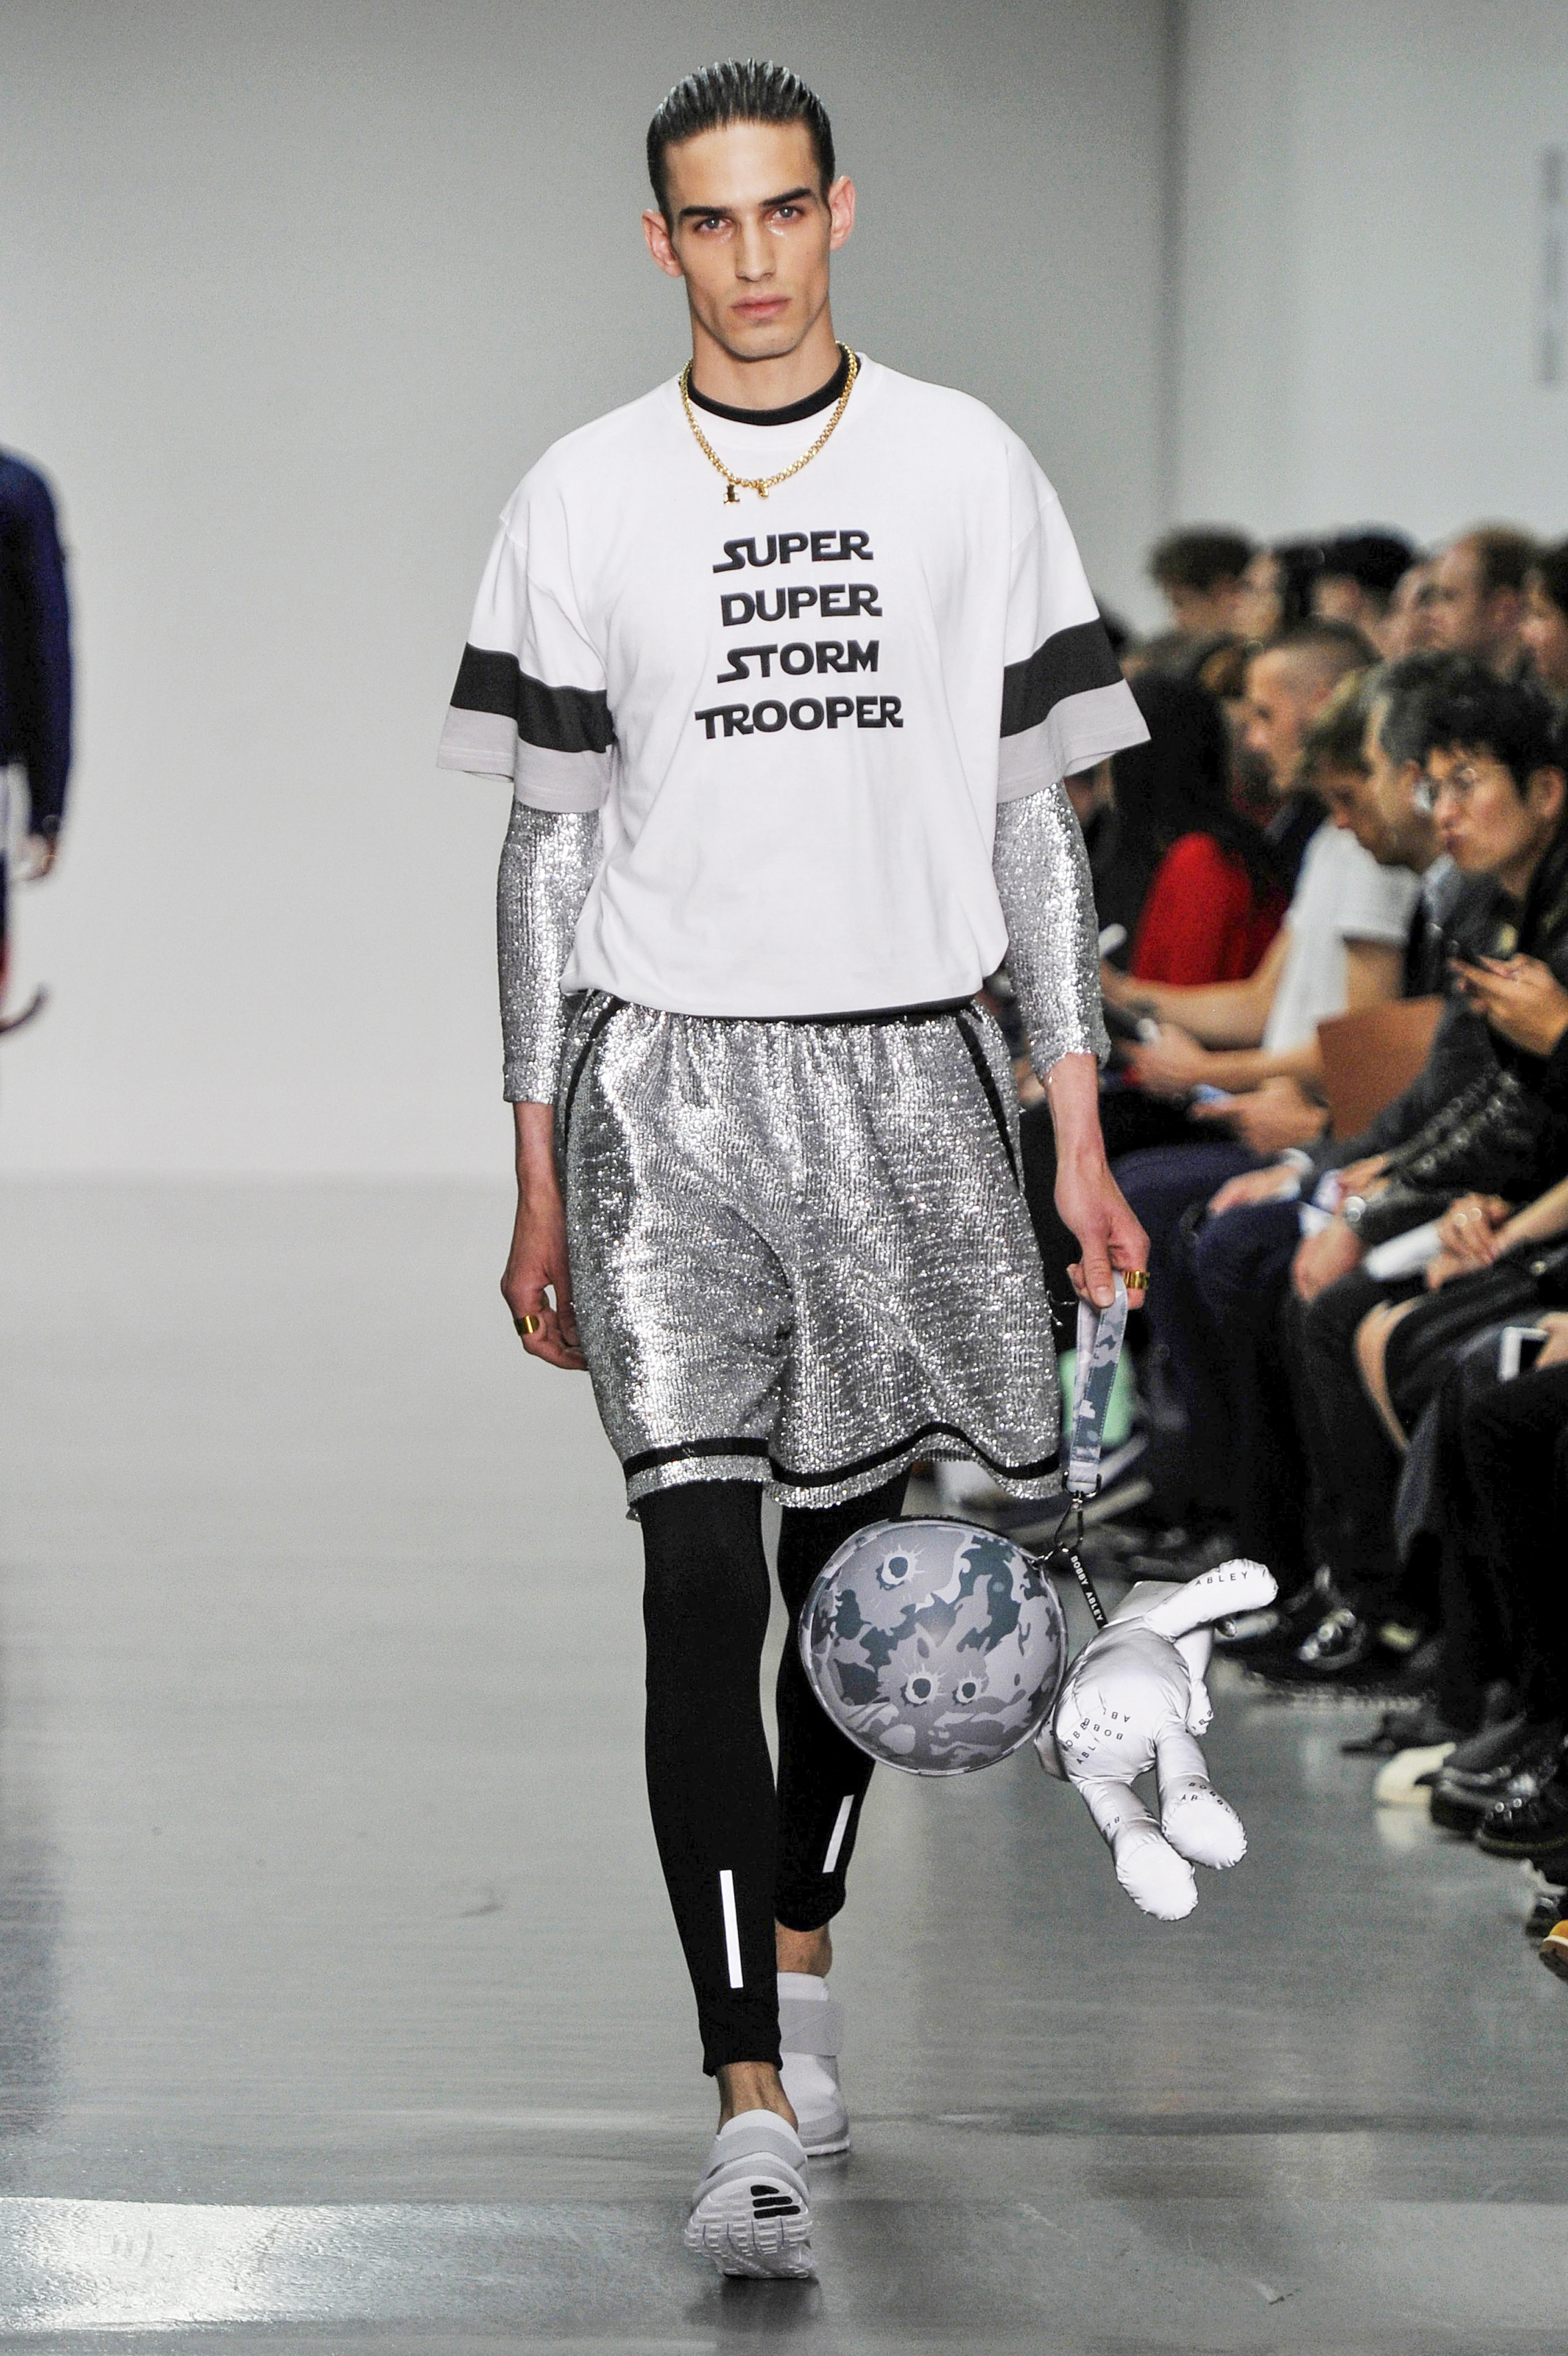 may-the-force-dress-you-star-wars-moda-bobby-abley-ss16-1